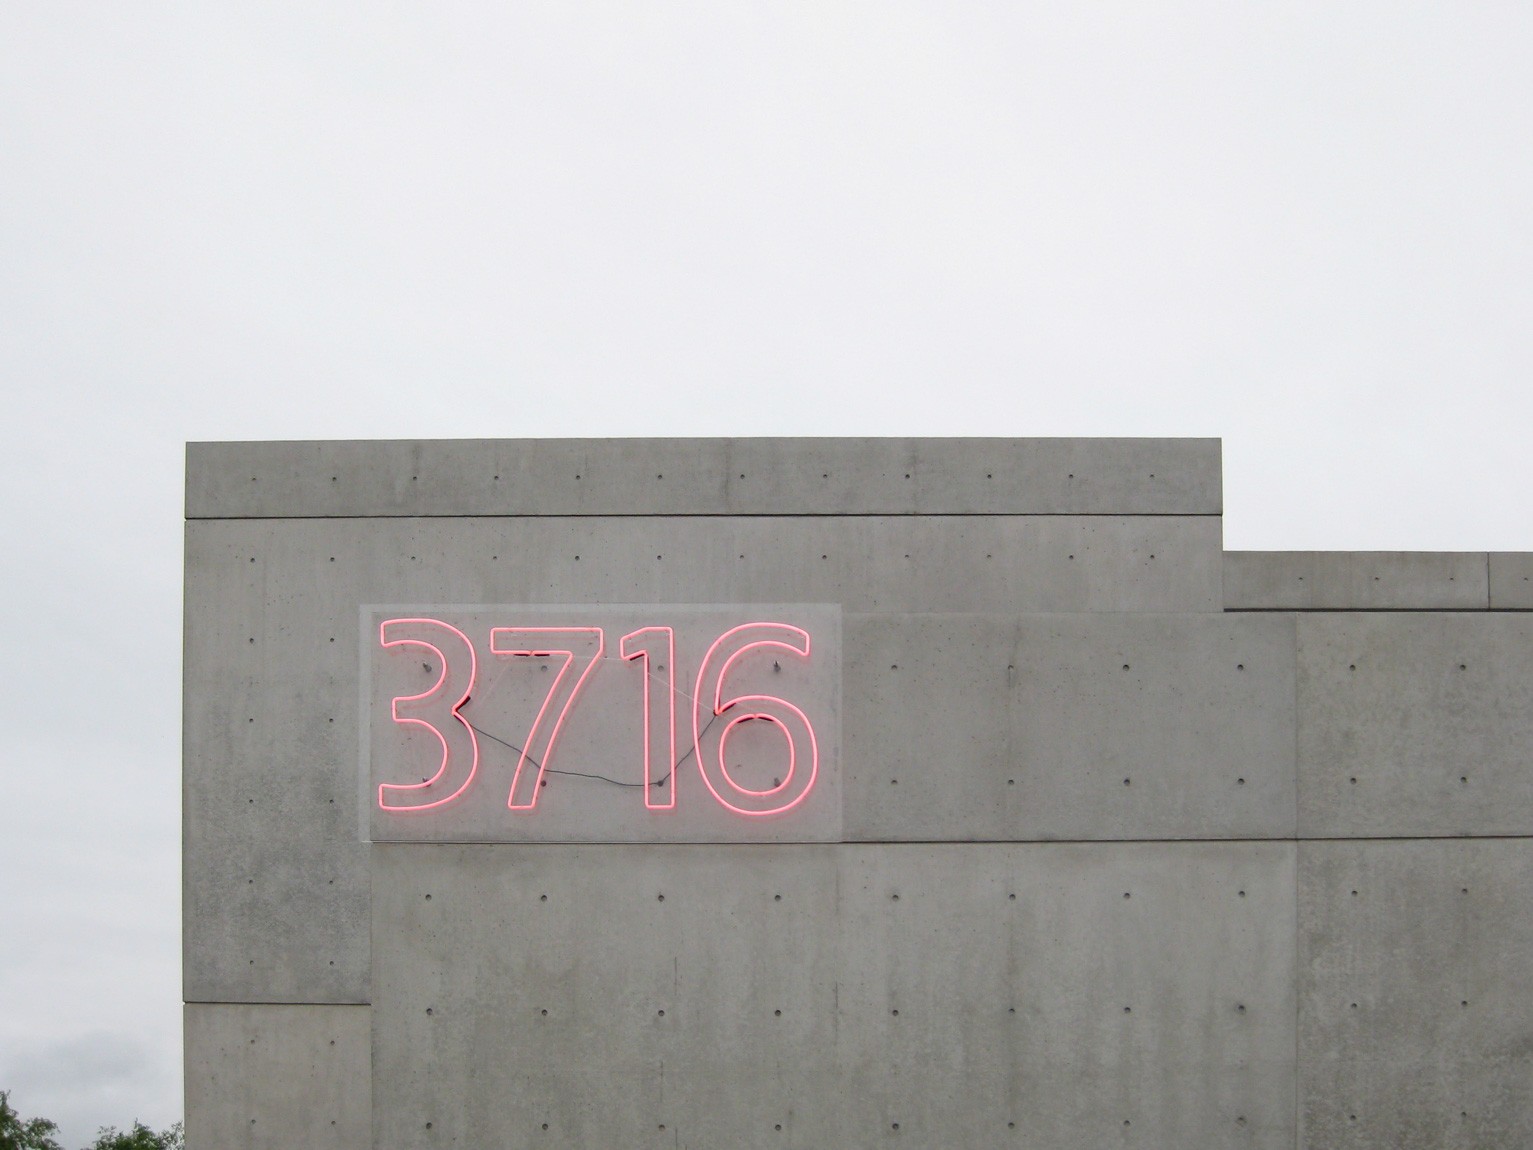 A view of a pink neon sign outlining "3716" installed on the side of the Pulitzer.